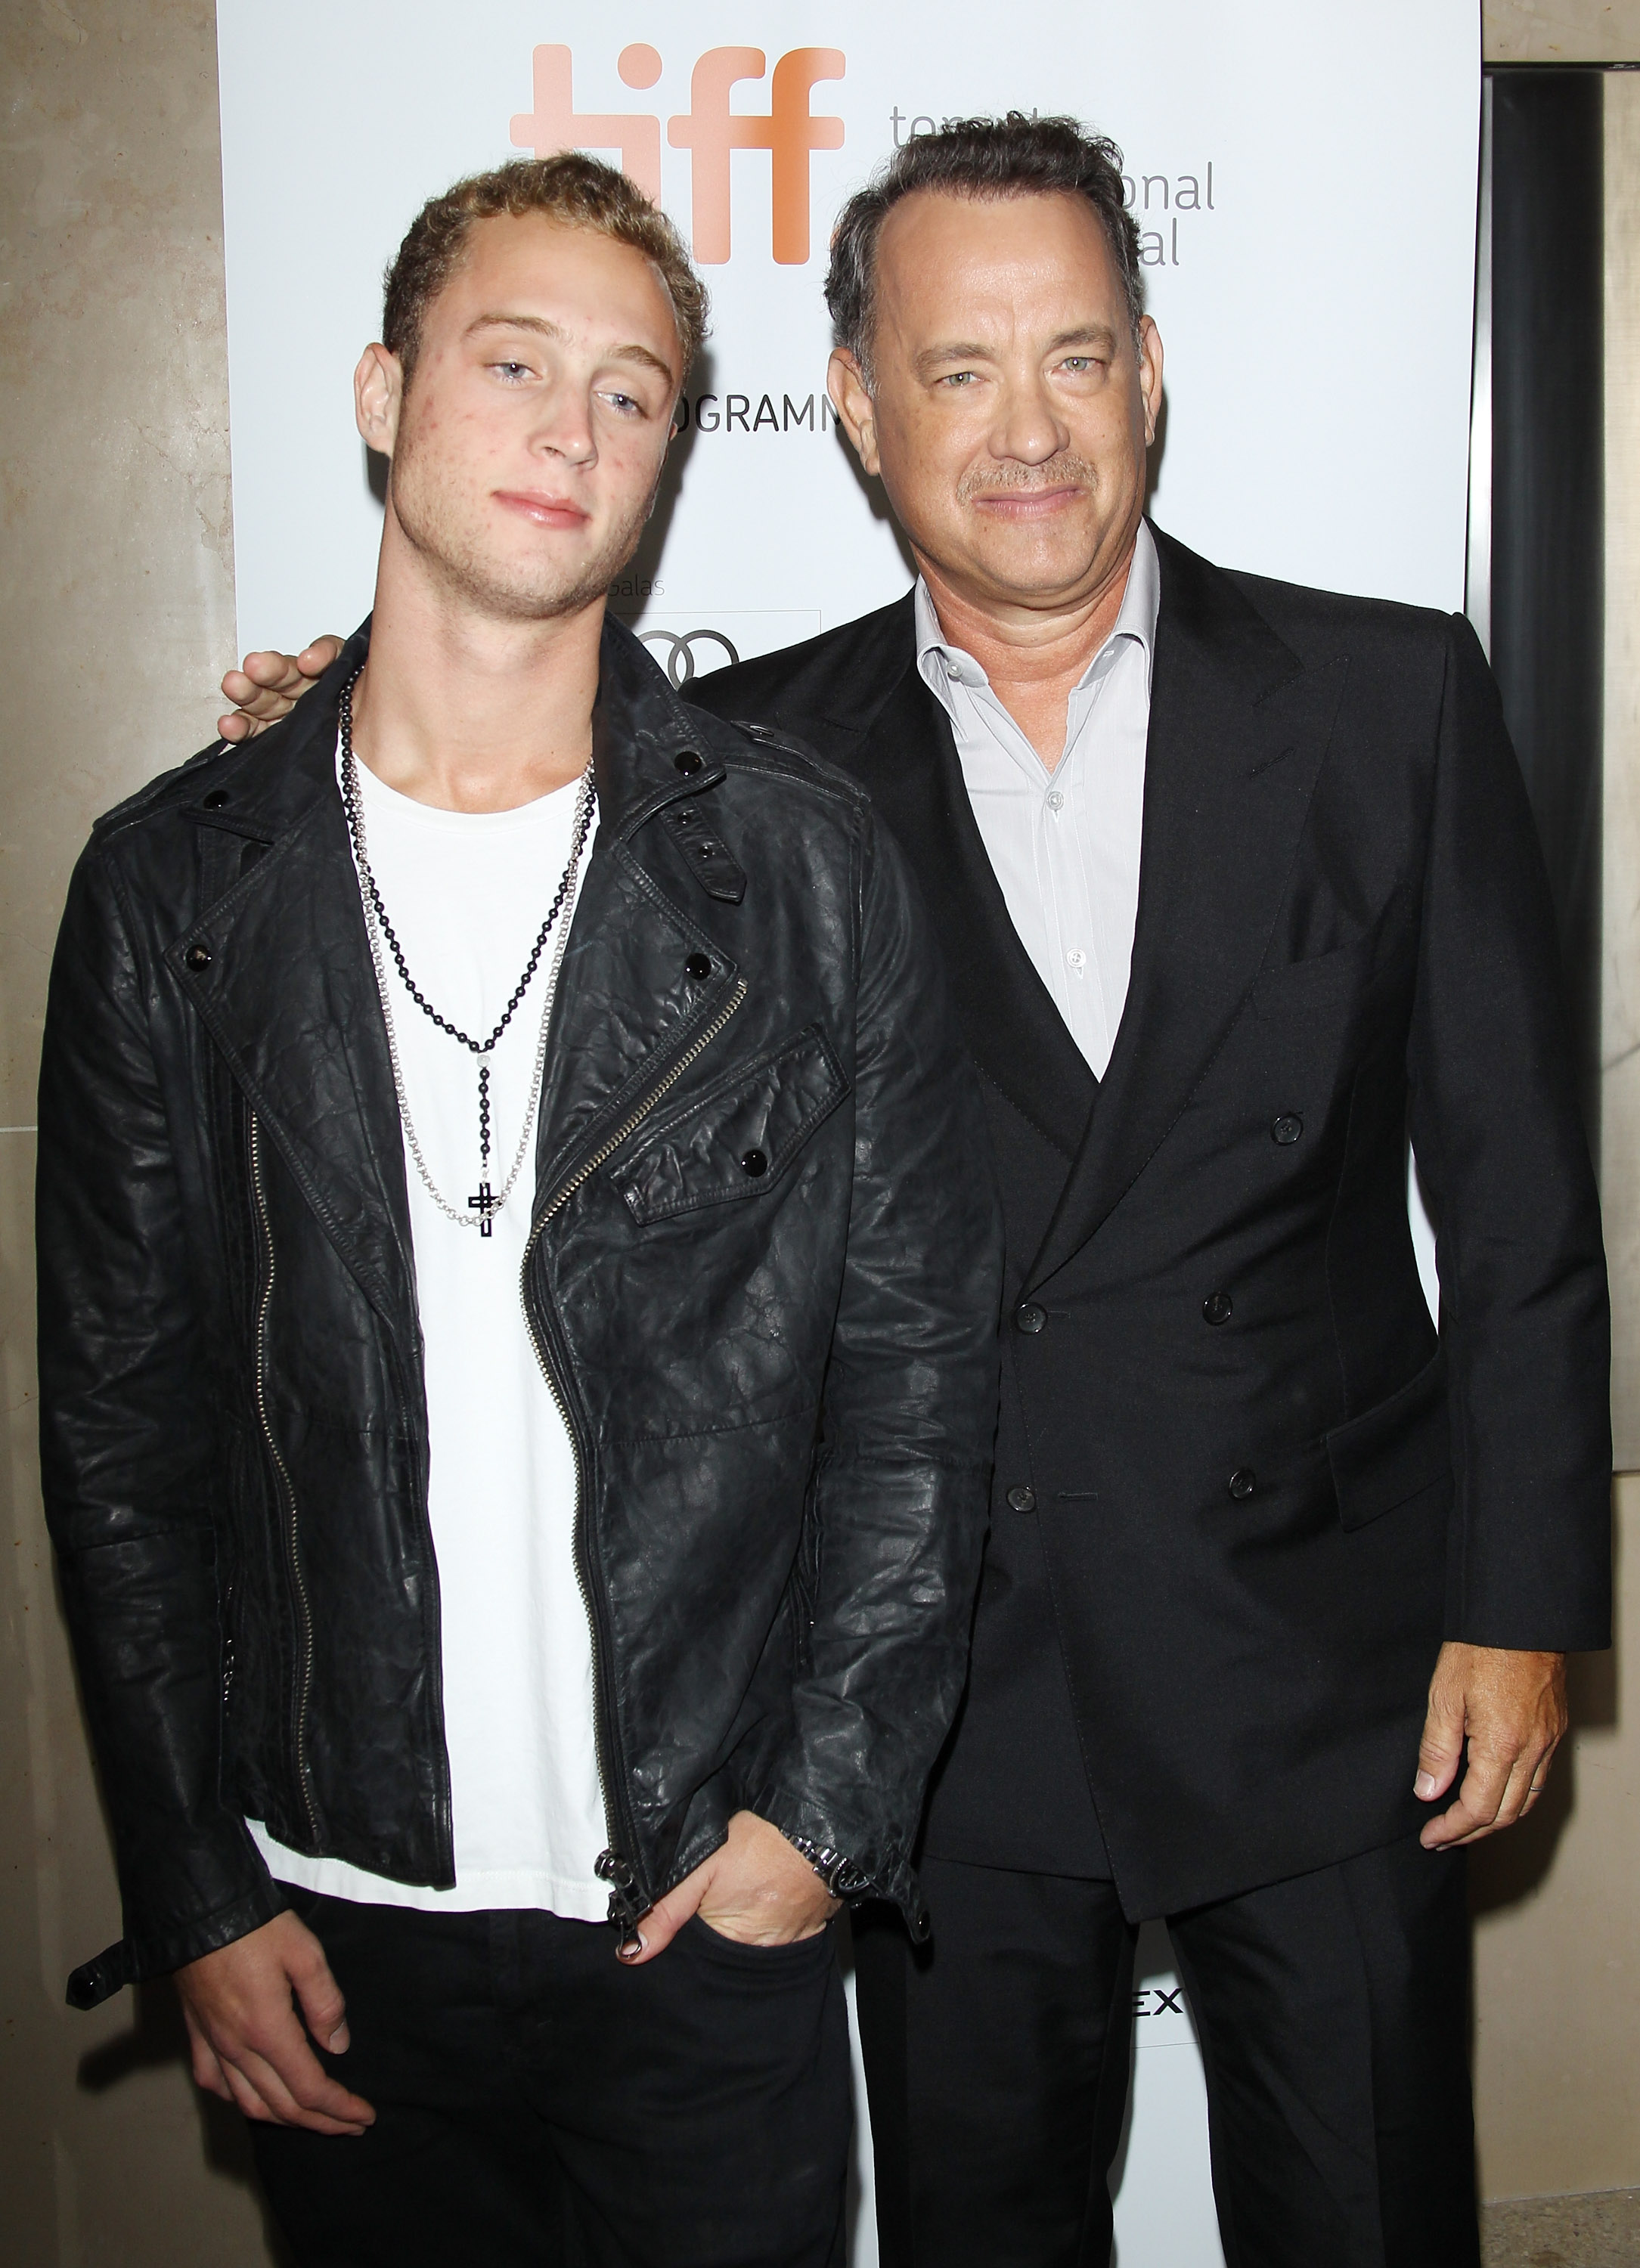 Chet and Tom Hanks at the Toronto International Film Festival in Toronto, Canada on September 8, 2012 | Source: Getty Images